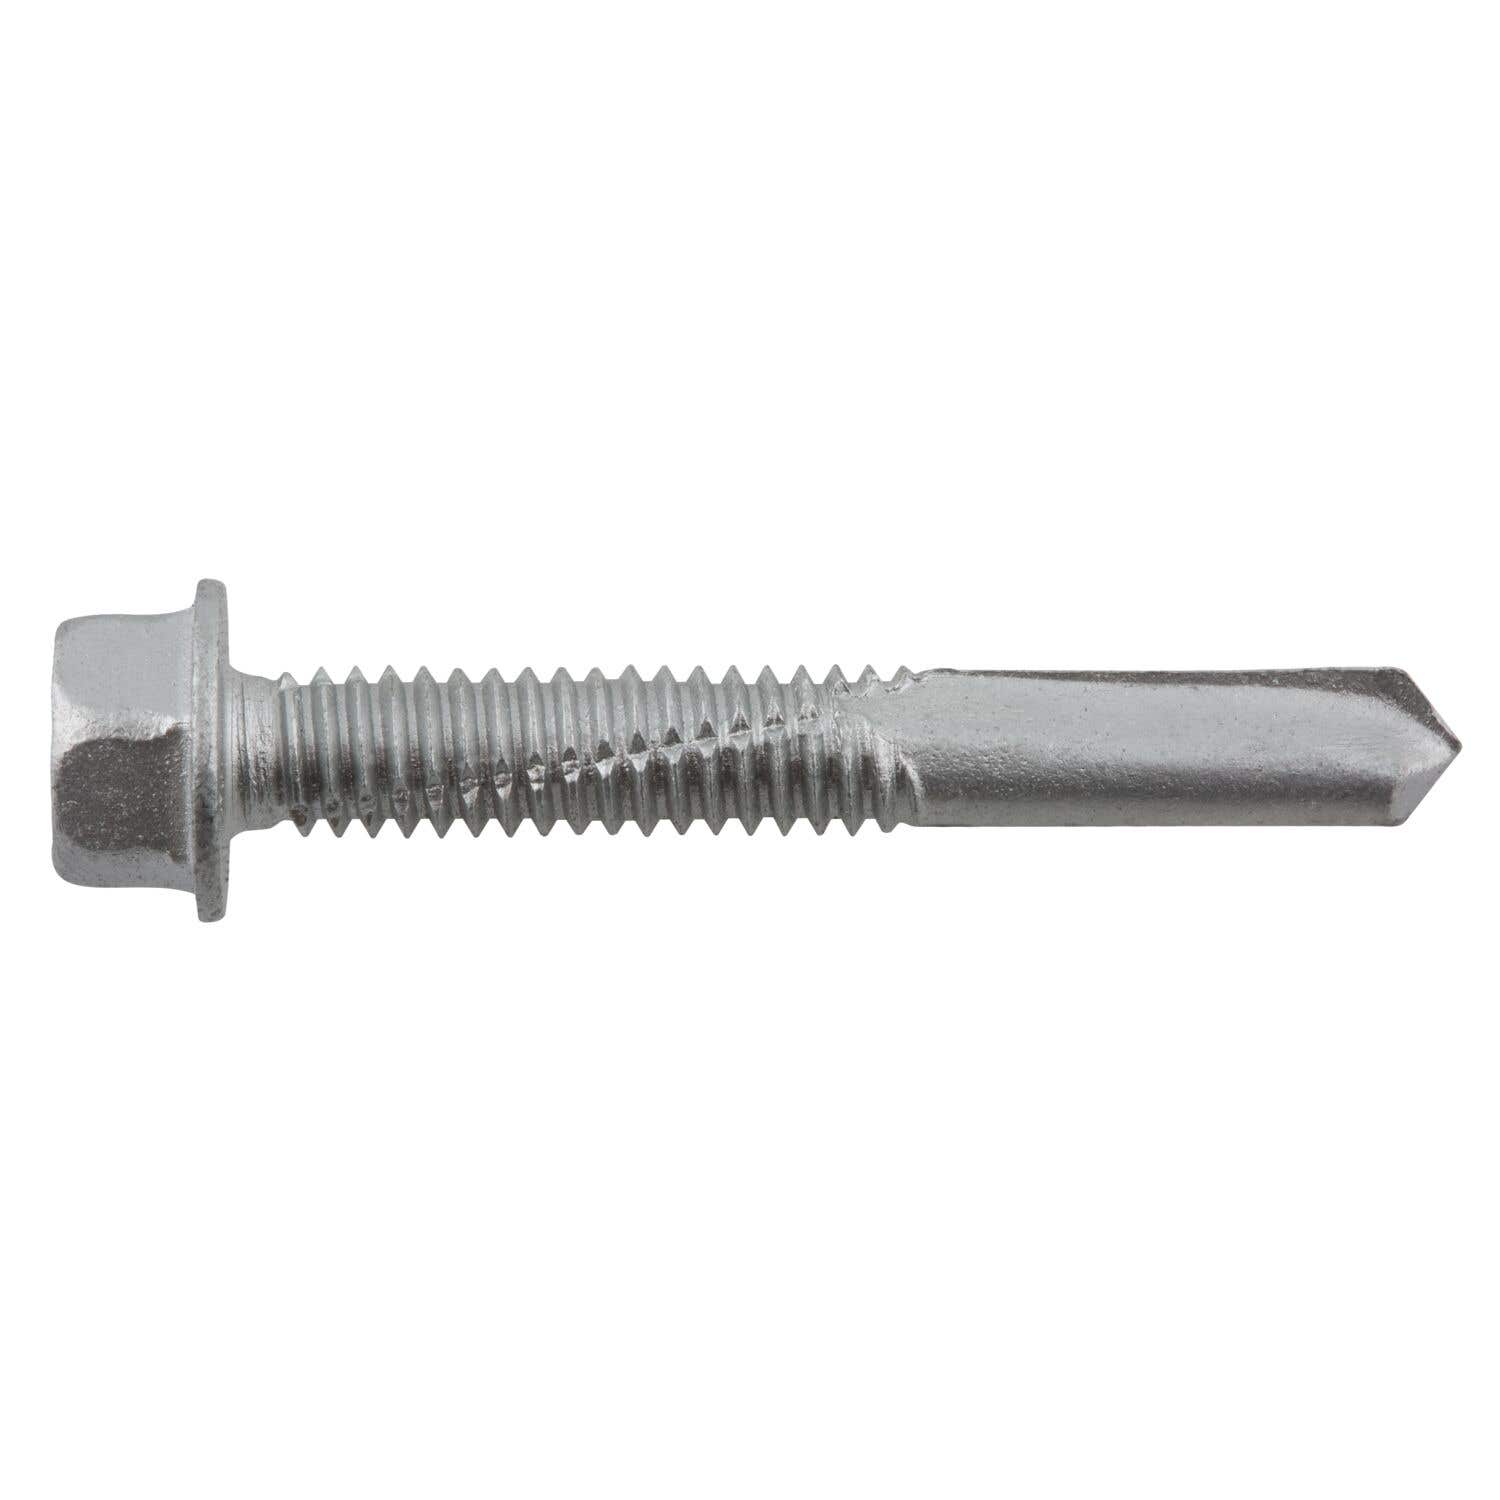 Hex Self Drill Screw 12-24 x 1-1/2" #5 Point 100 Pieces 